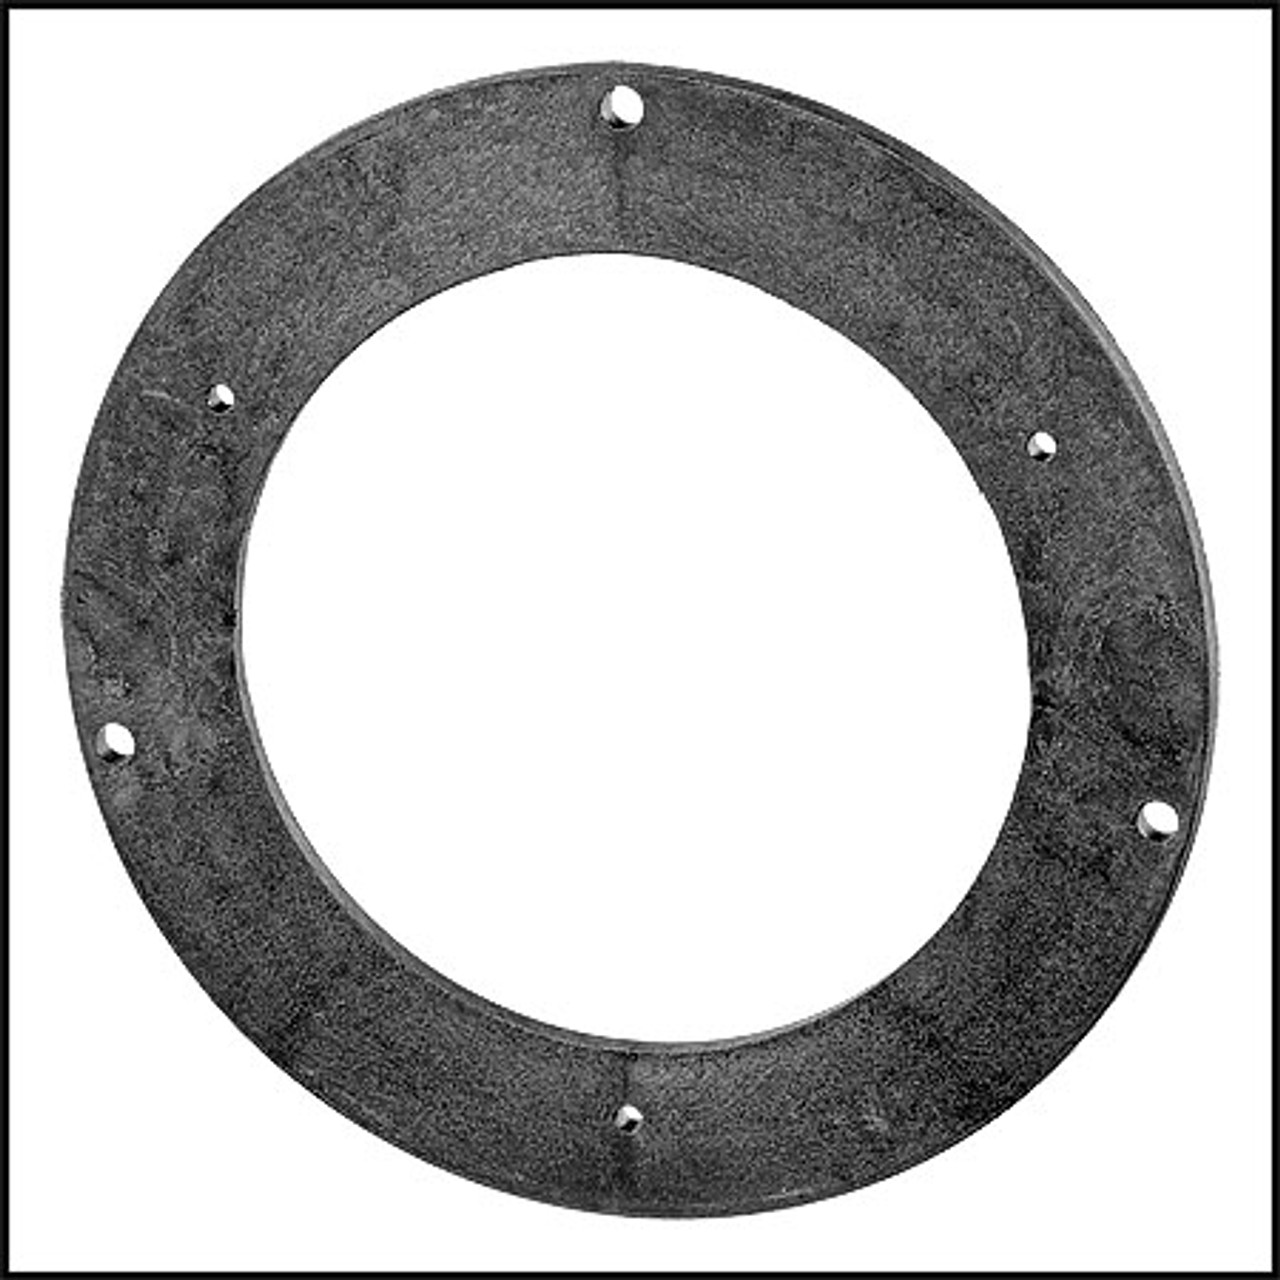 Pentair/PacFab Mounting Plate For 1/2 HP & 3/4 HP Full Rated Pumps (#355028)